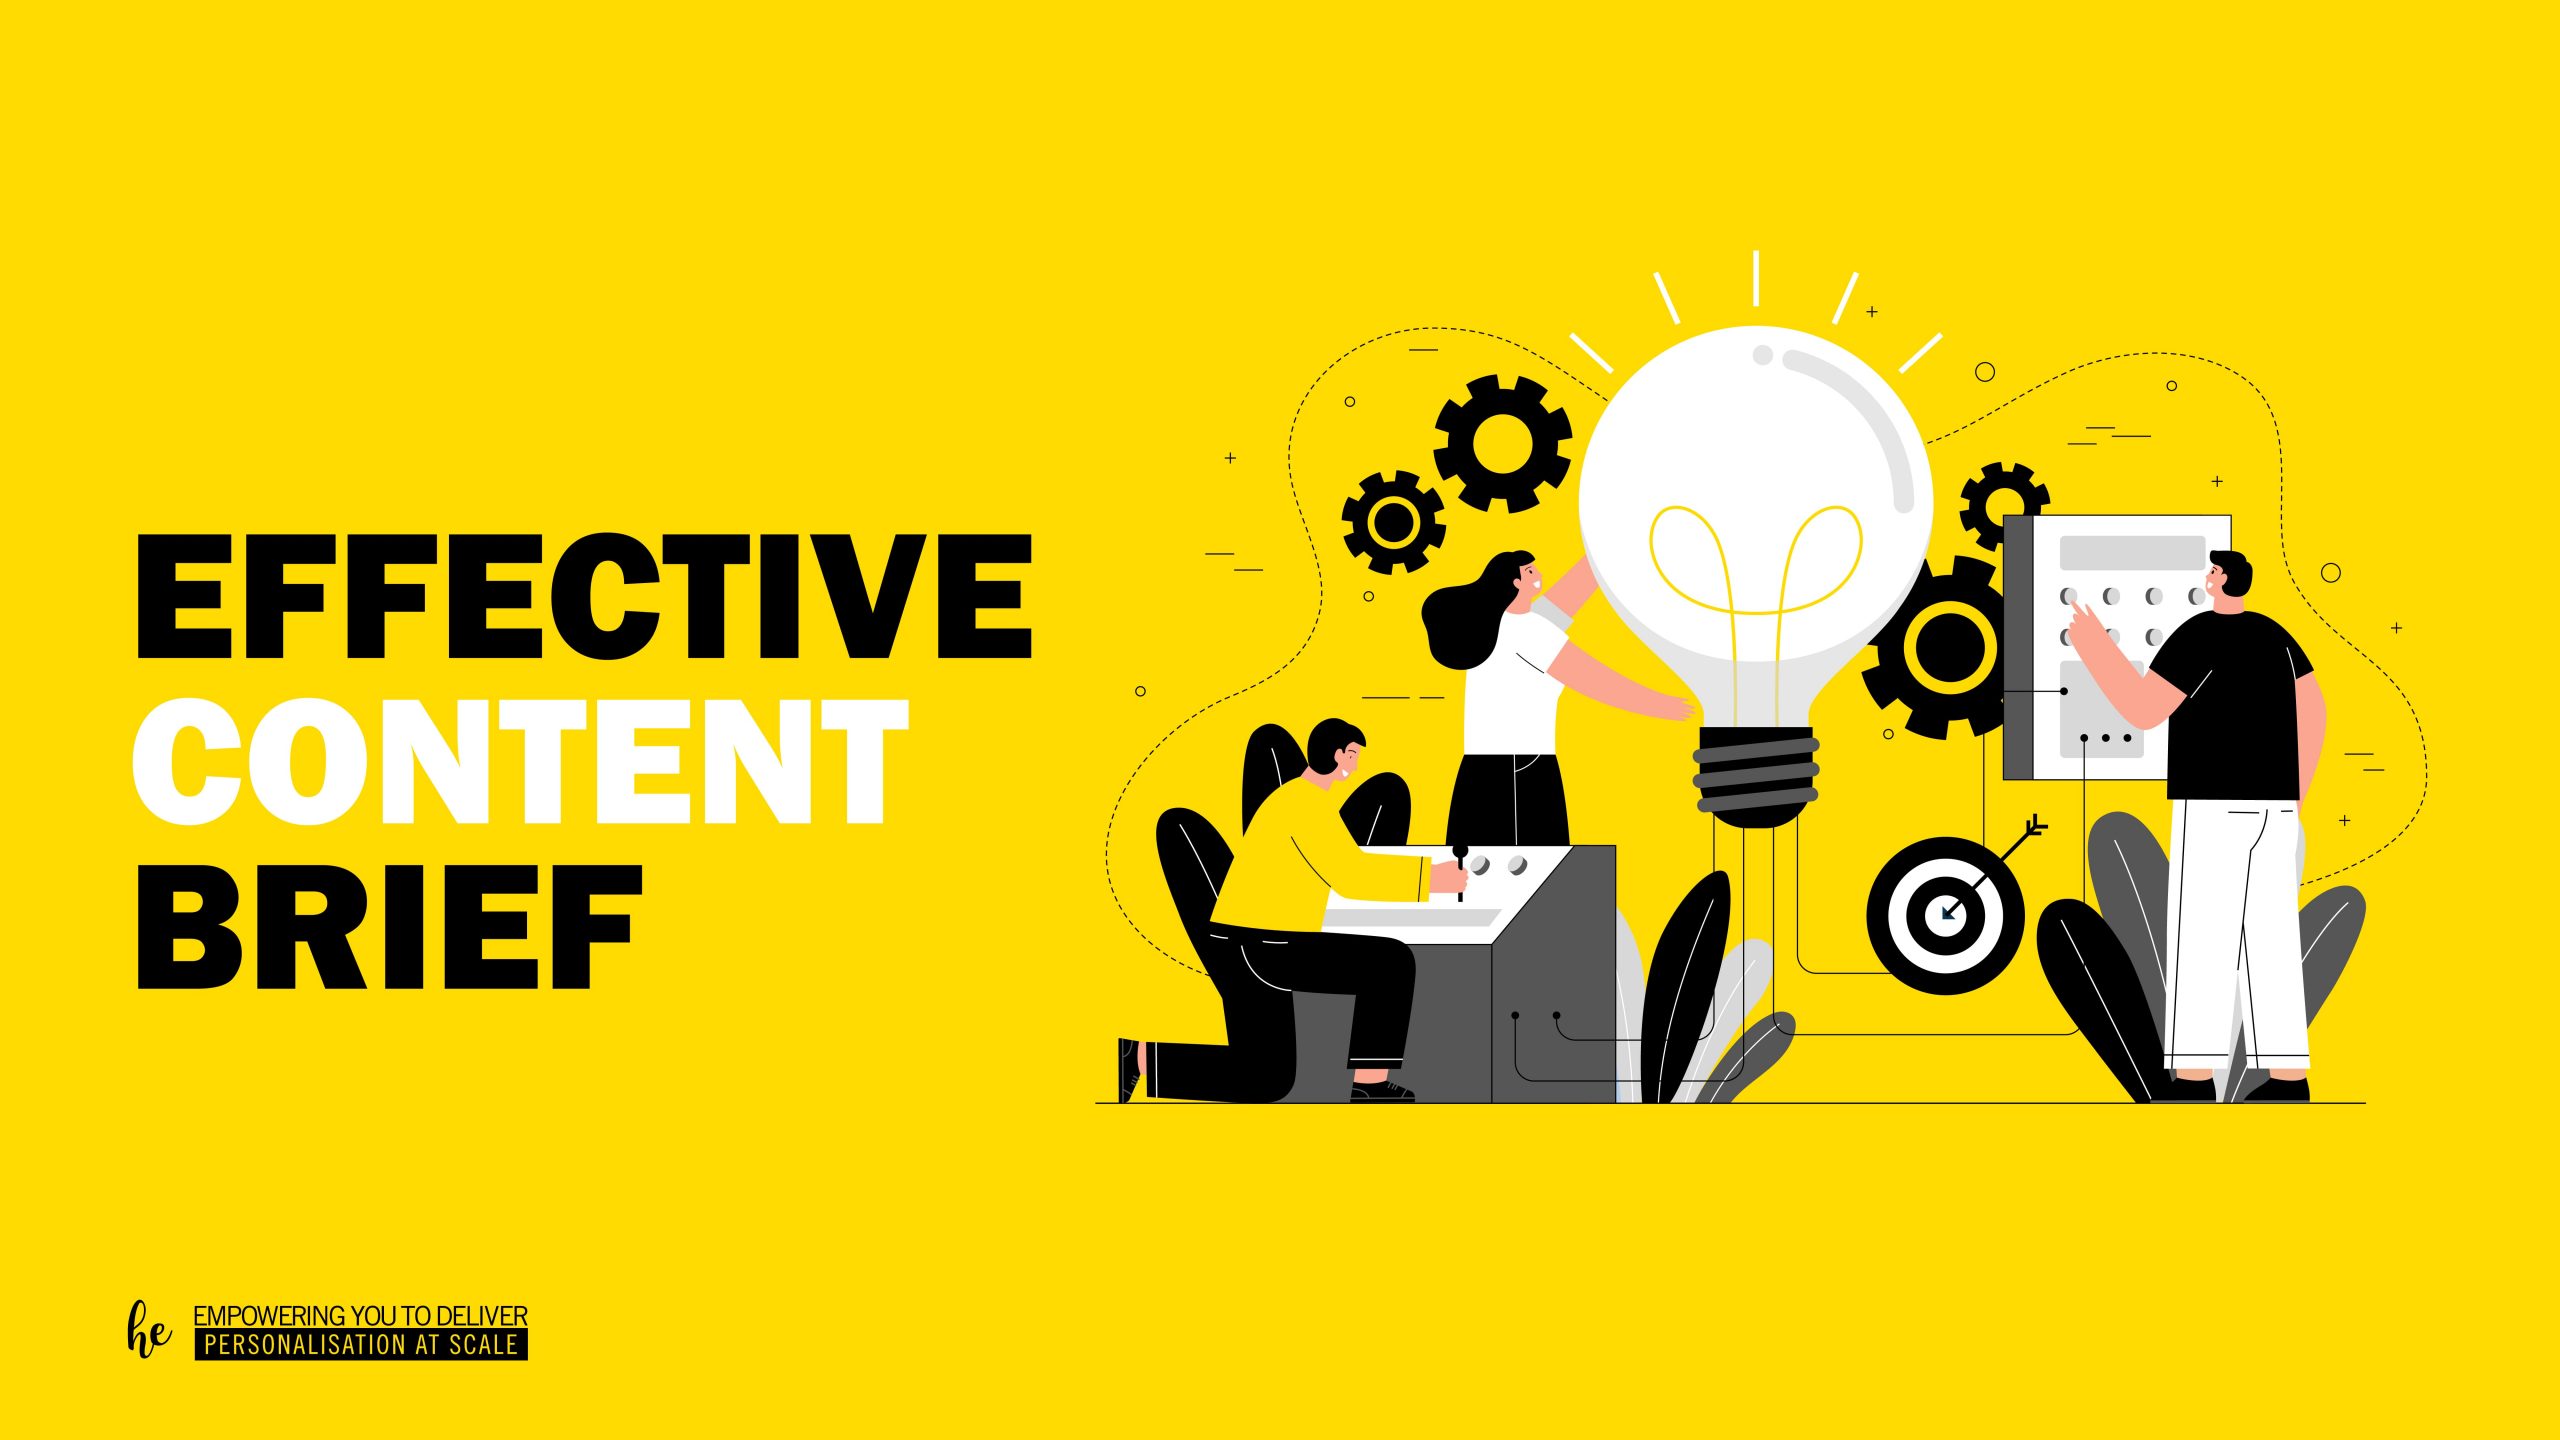 How do you write an Effective Content Brief for a business?